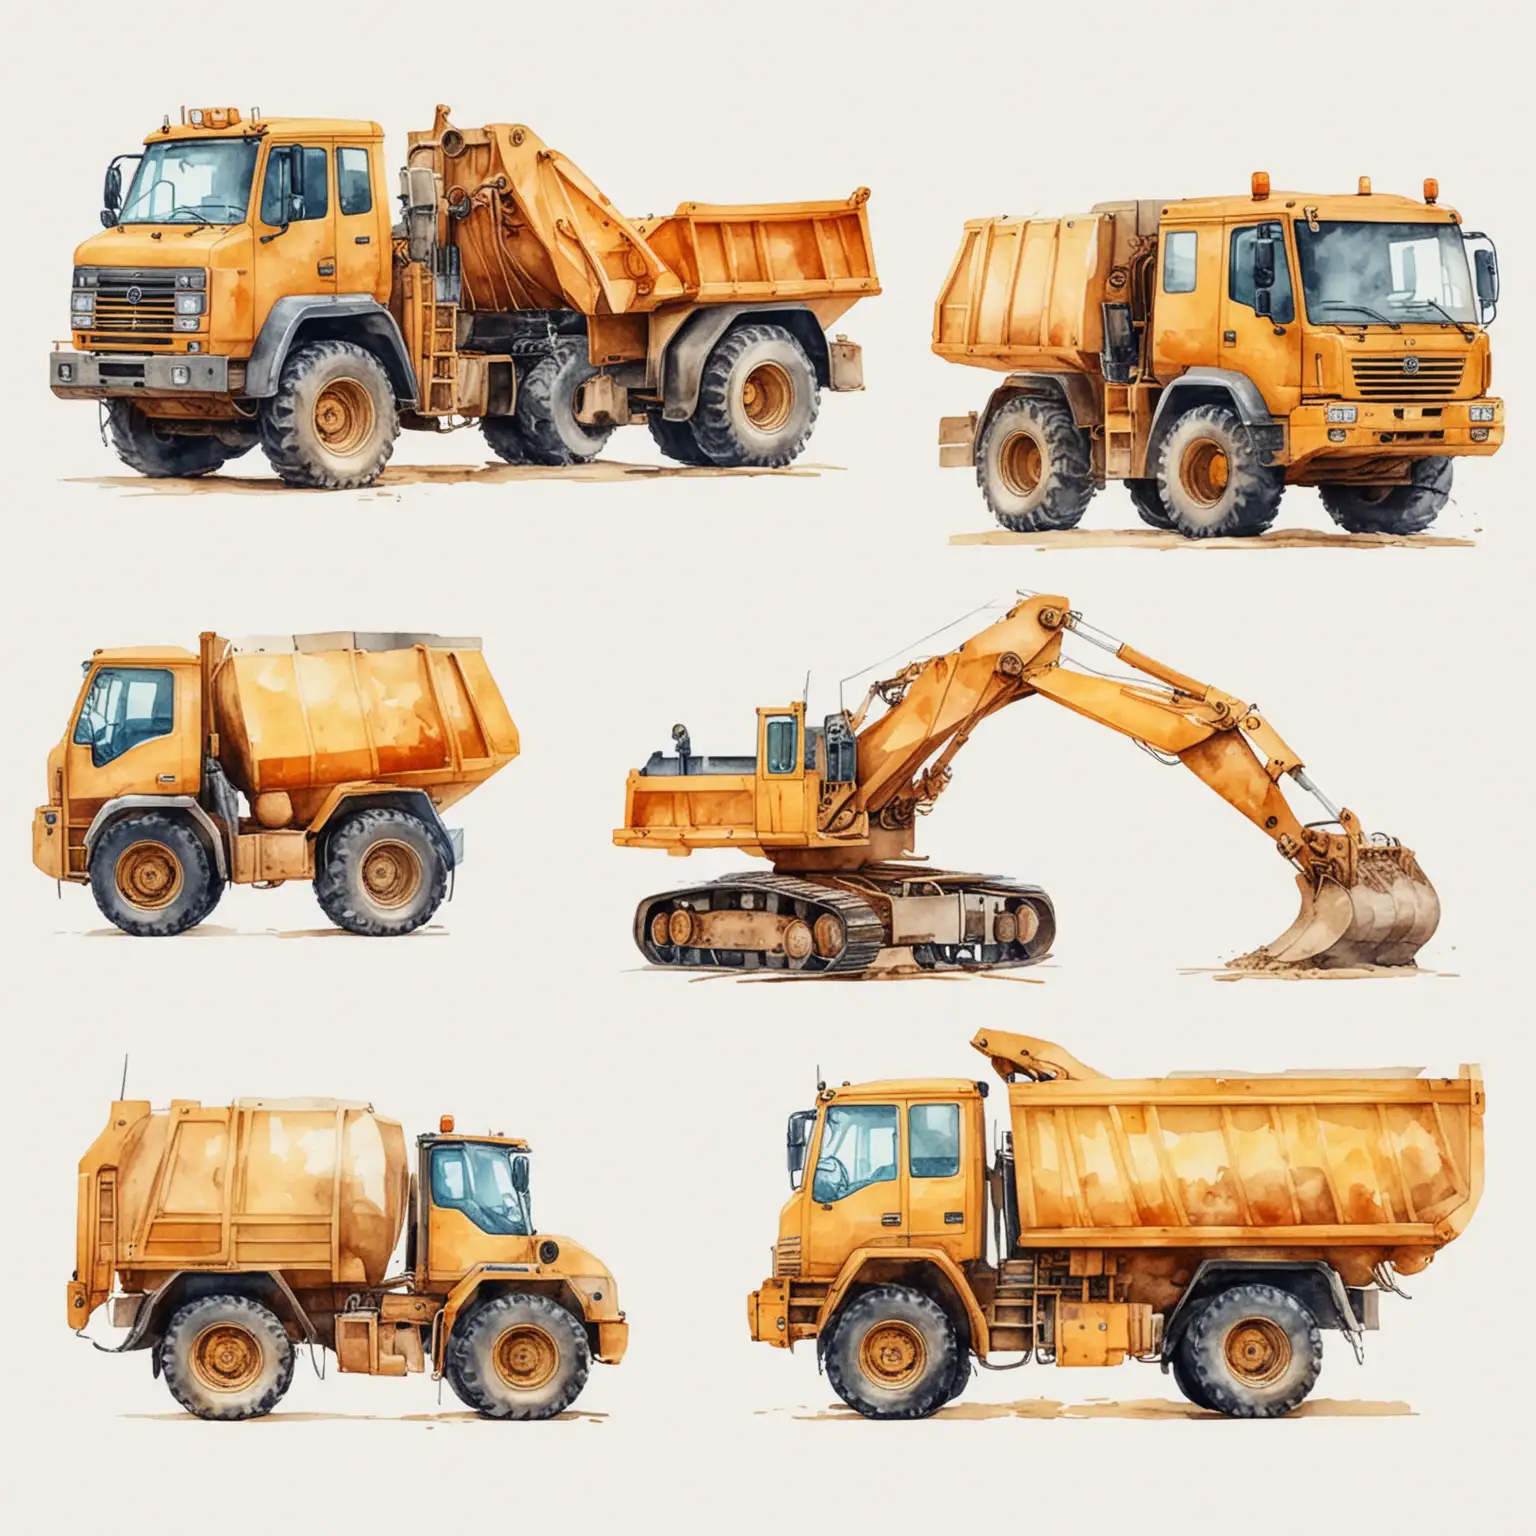 Watercolor Construction Vehicle Illustration on White Background